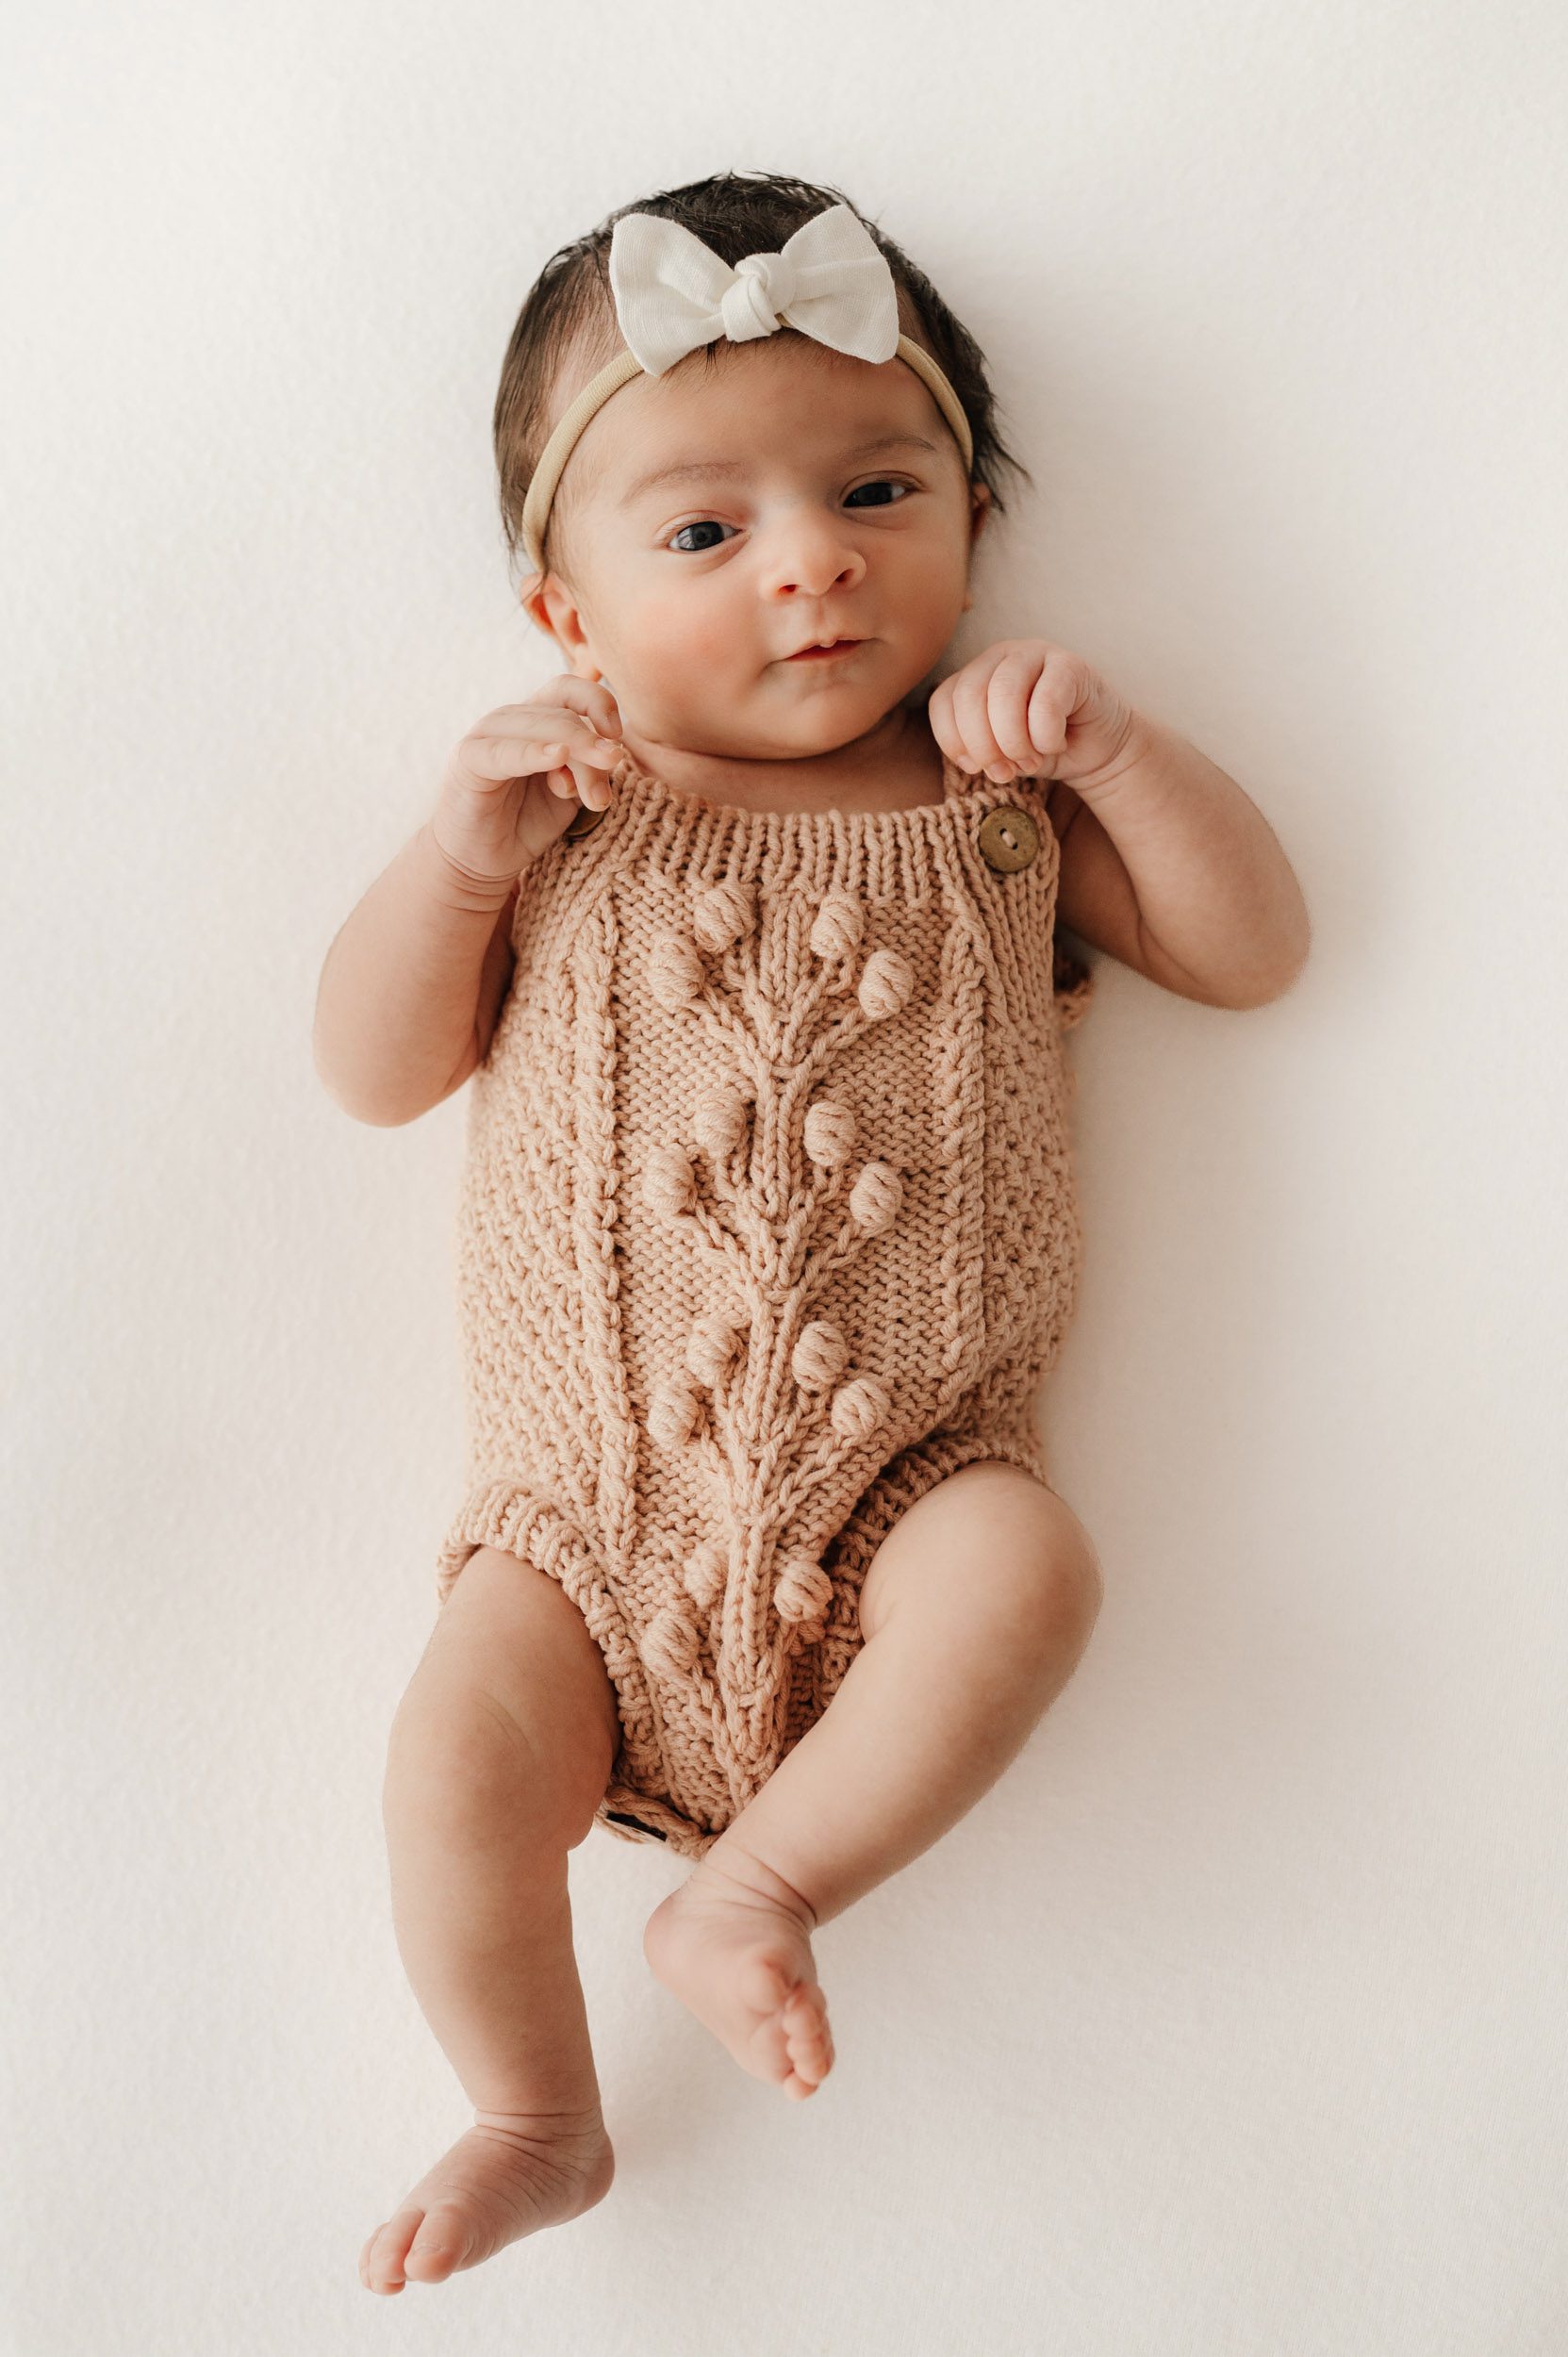 a baby girl wearing a light pink knit onesie and white bow headband laying on her back on a white backdrop looking directly up at the camera during a natural light newborn photoshoot